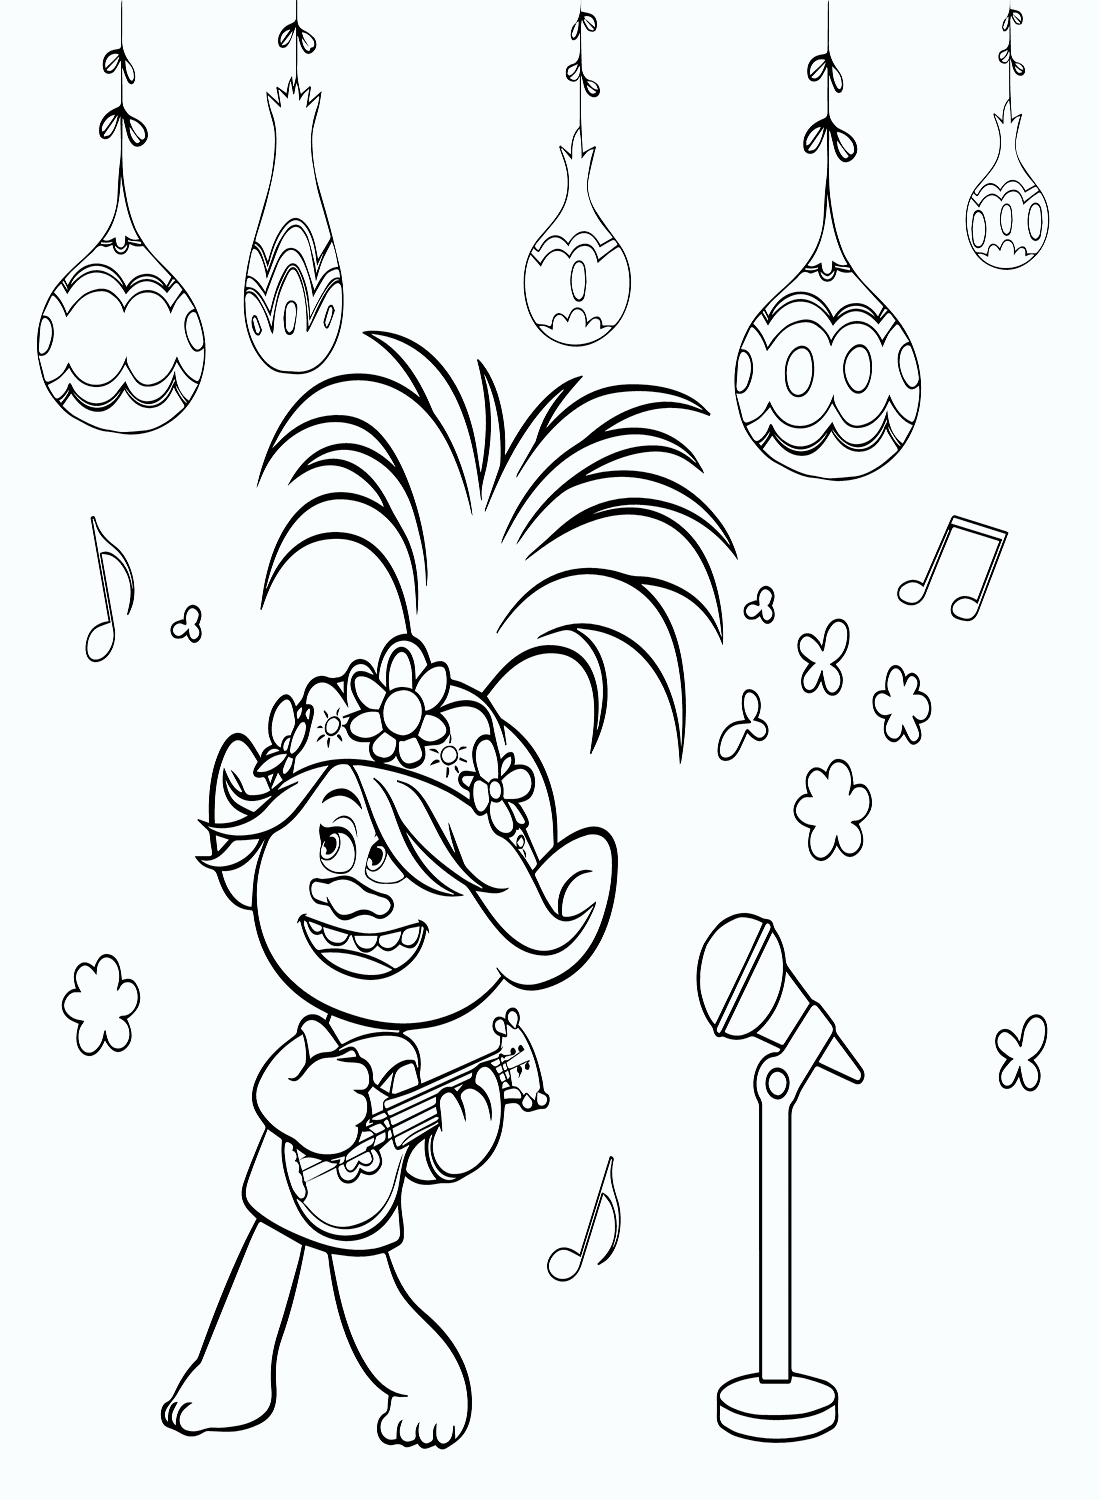 Trolls World Tour coloring pages  Poppy coloring page, Coloring pages,  Cute coloring pages